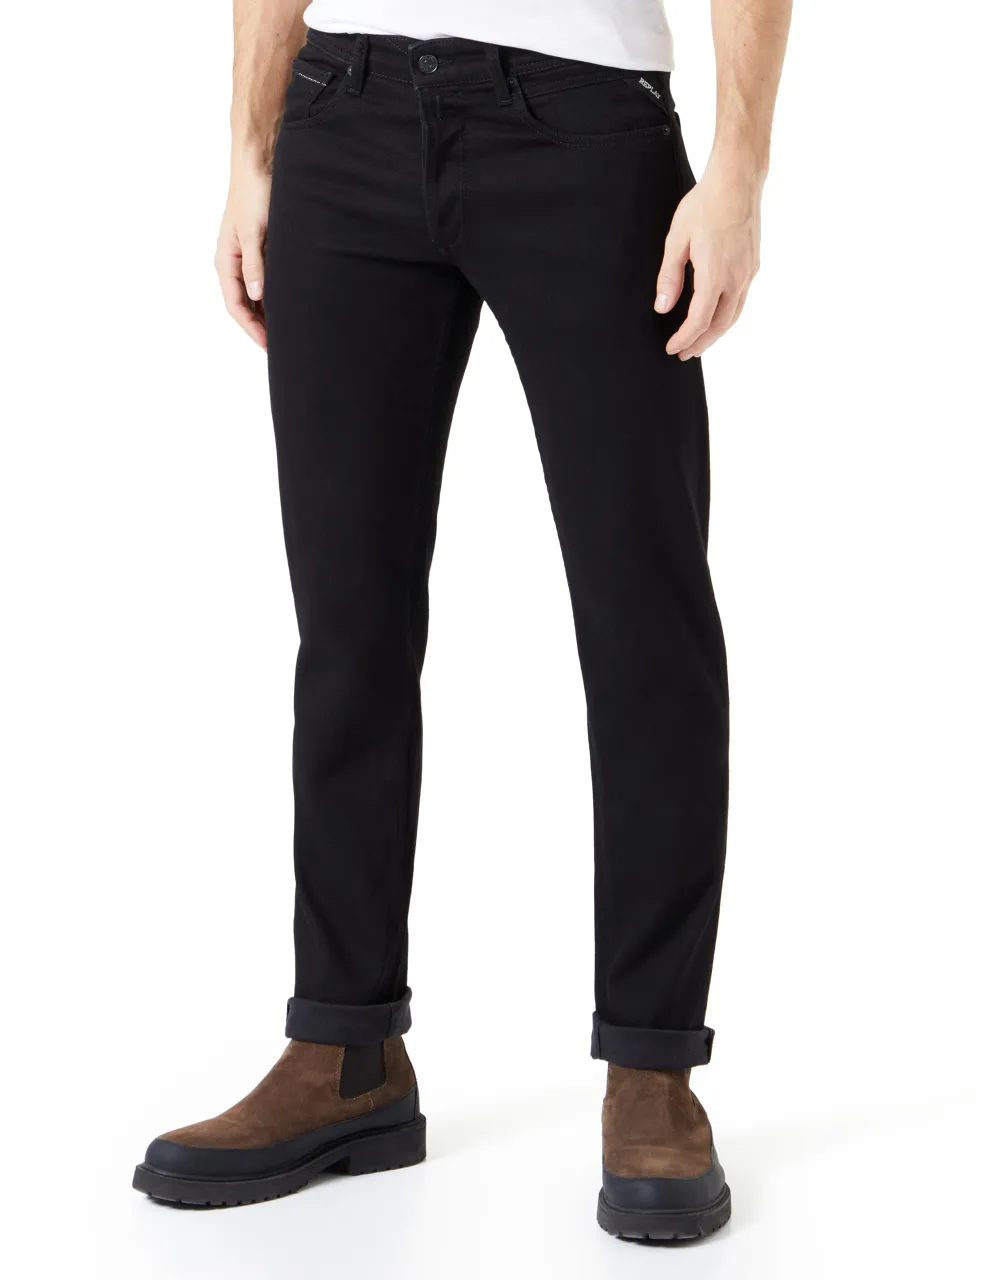 Replay Herren Jeans Grover Straight-Fit mit Stretch